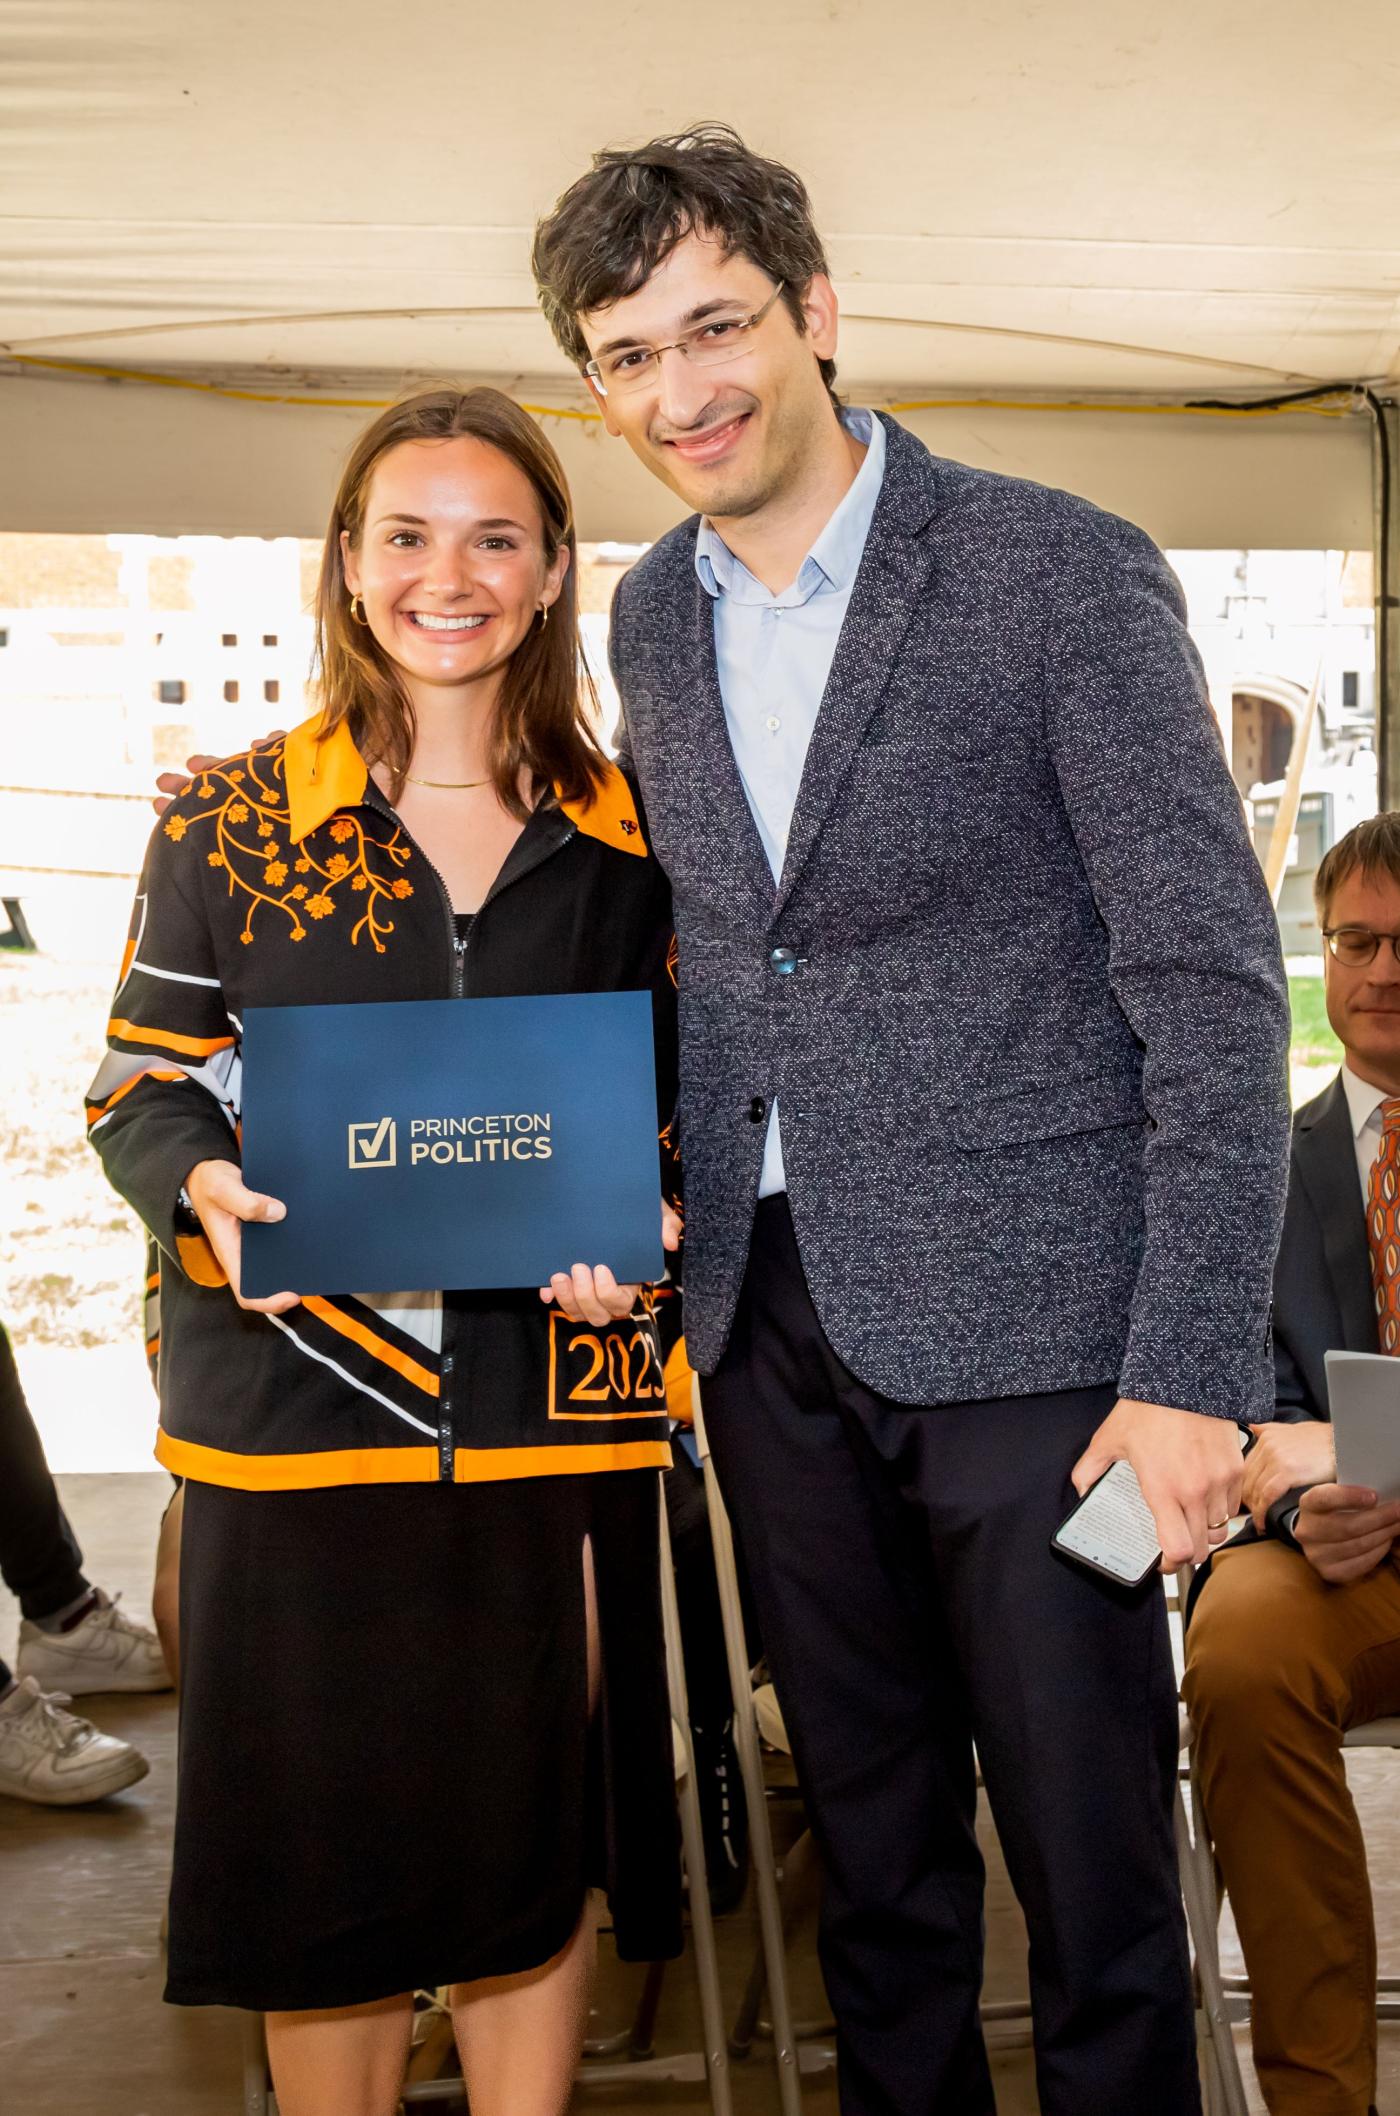 German with student presenting award